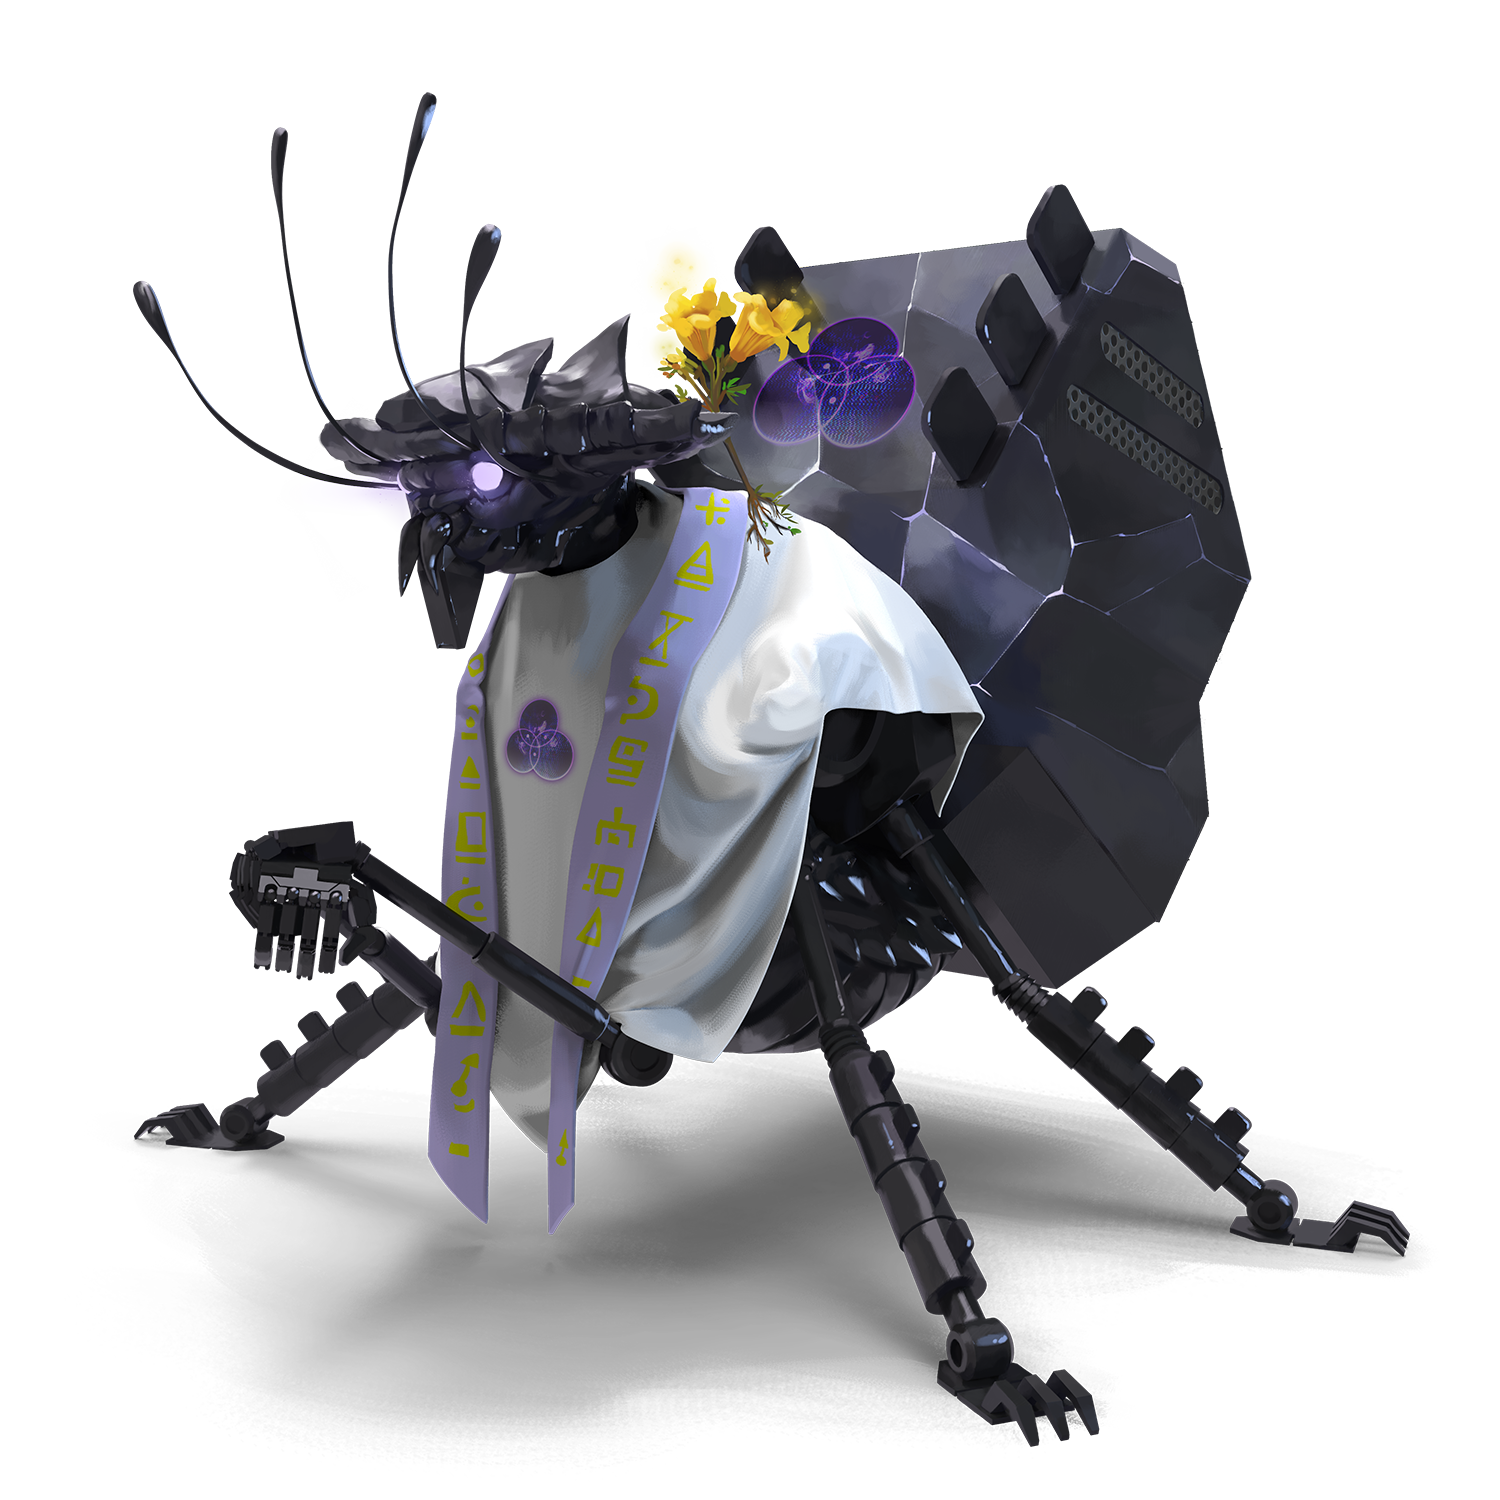 Triunite Priest. An insectlike robot standing on four legs with a white robe over its torso